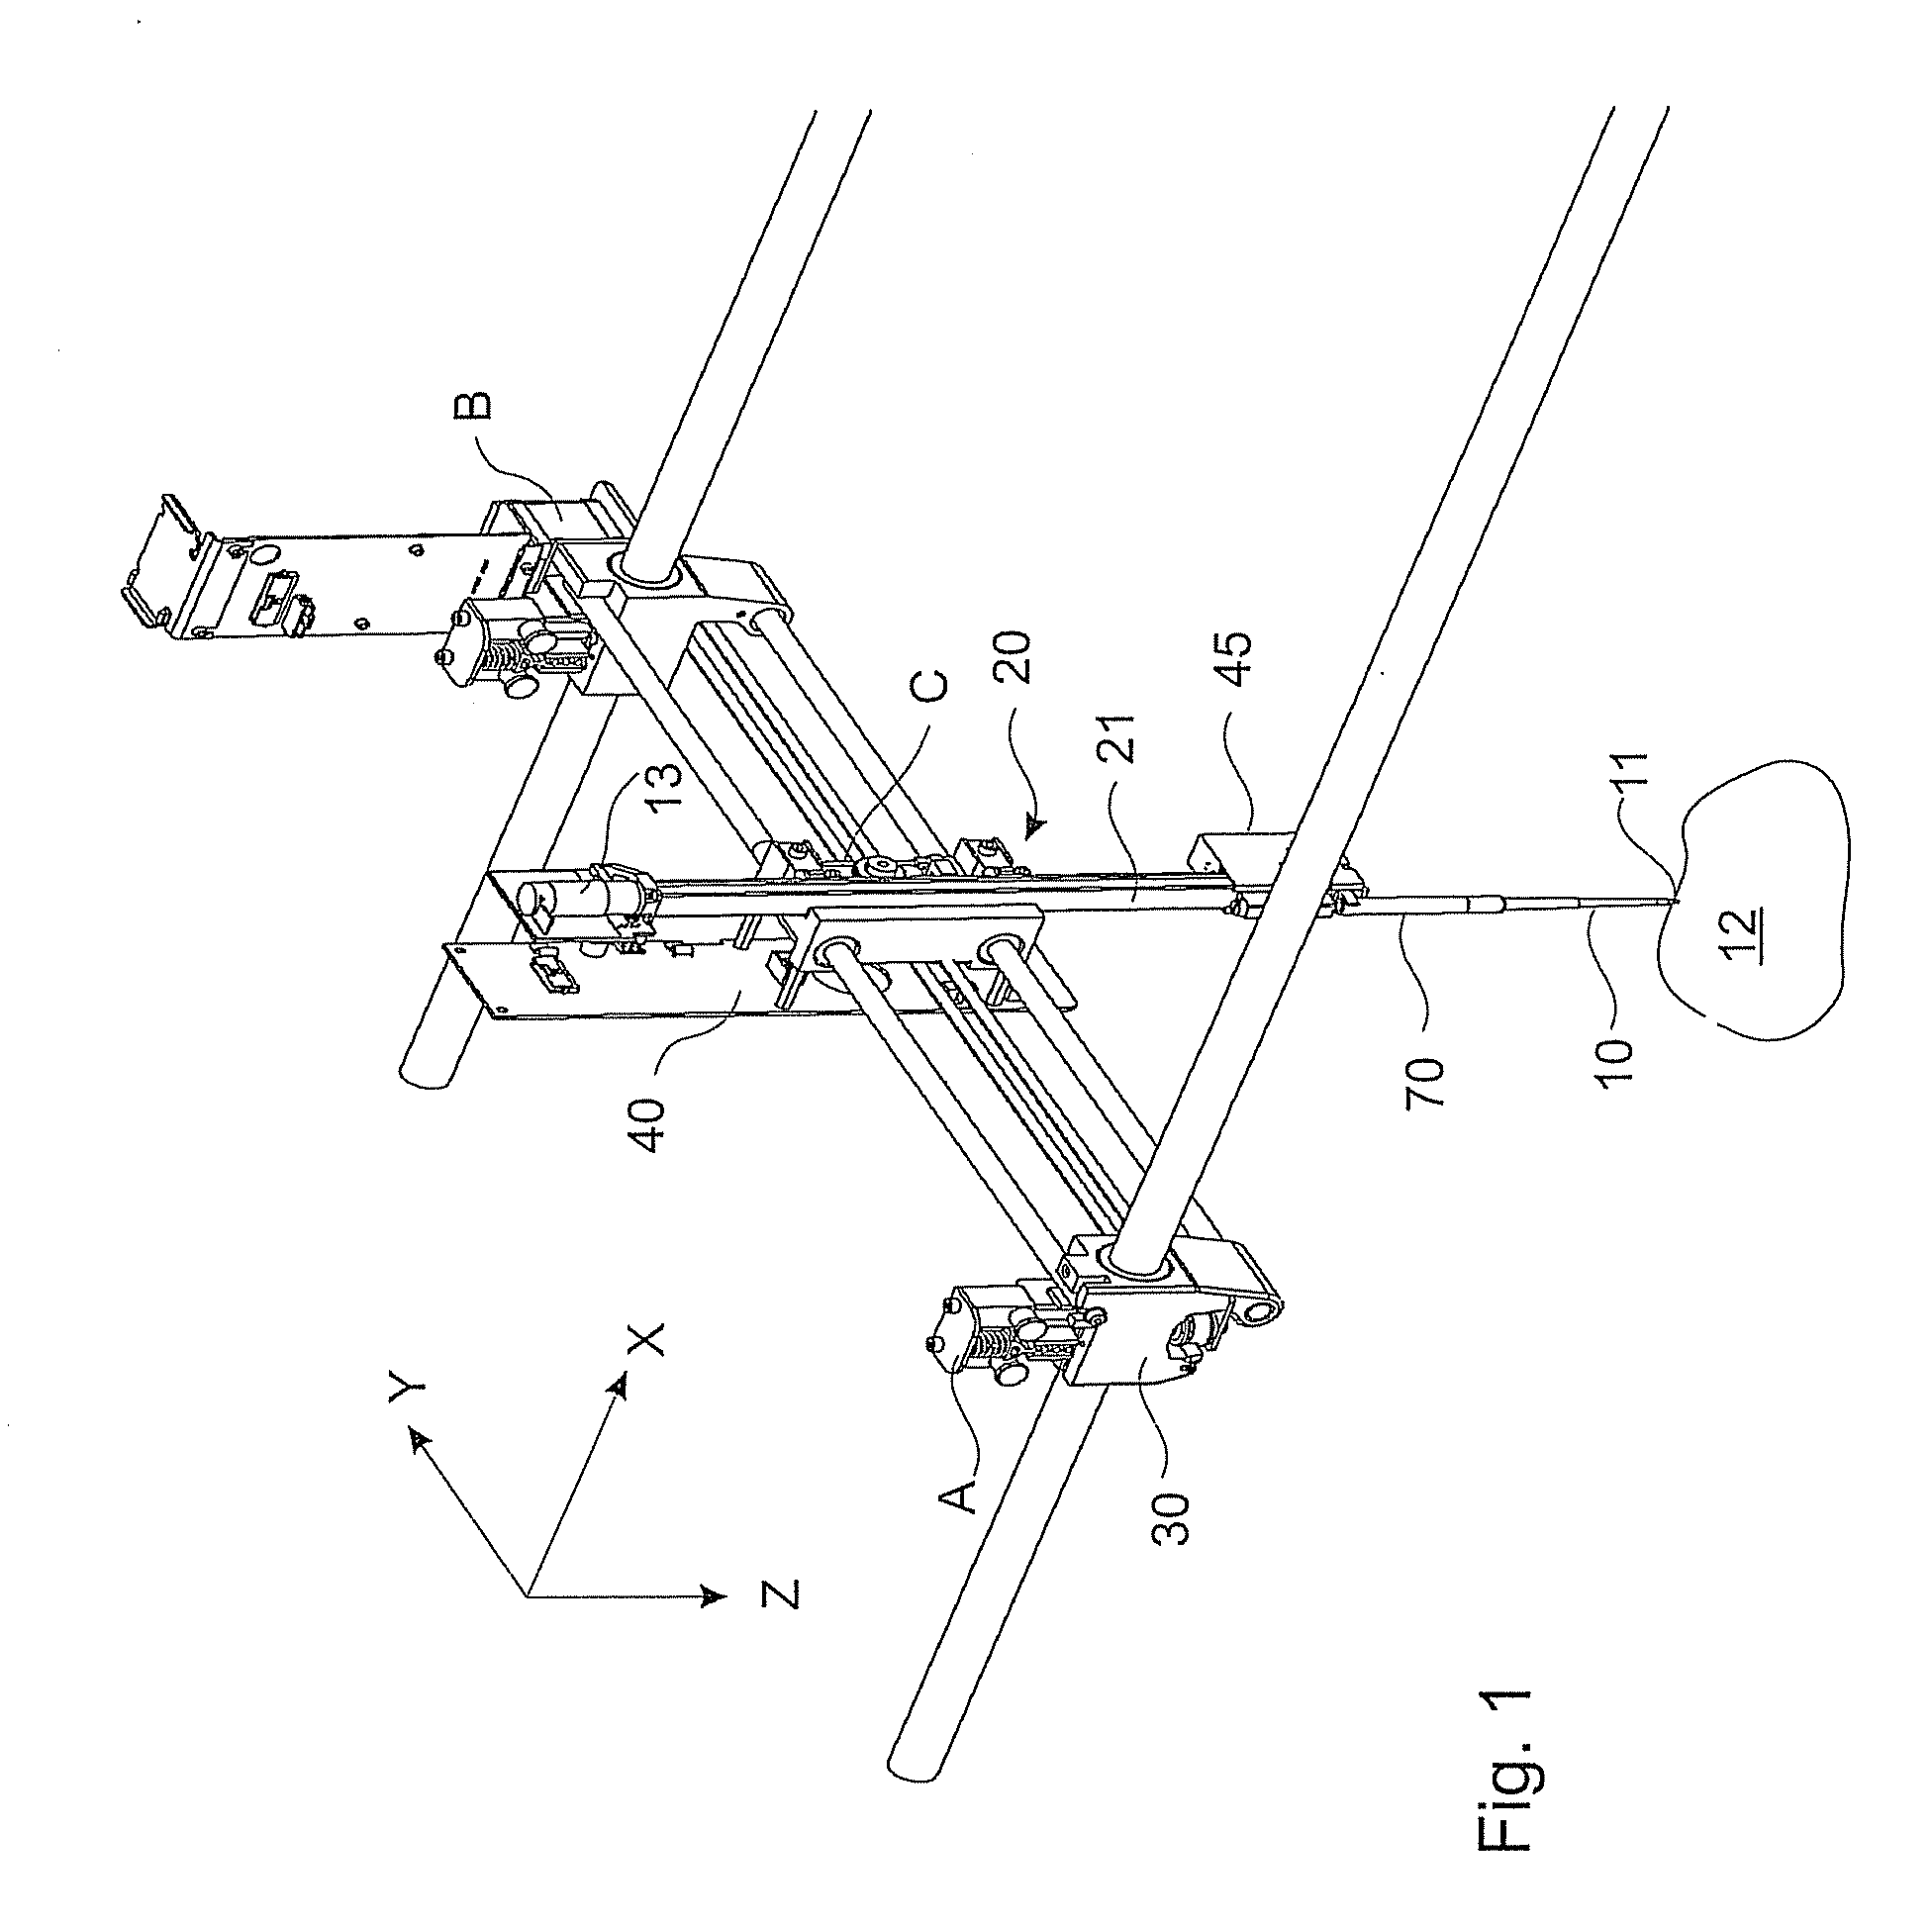 Positioning device for the positioning of pipettes